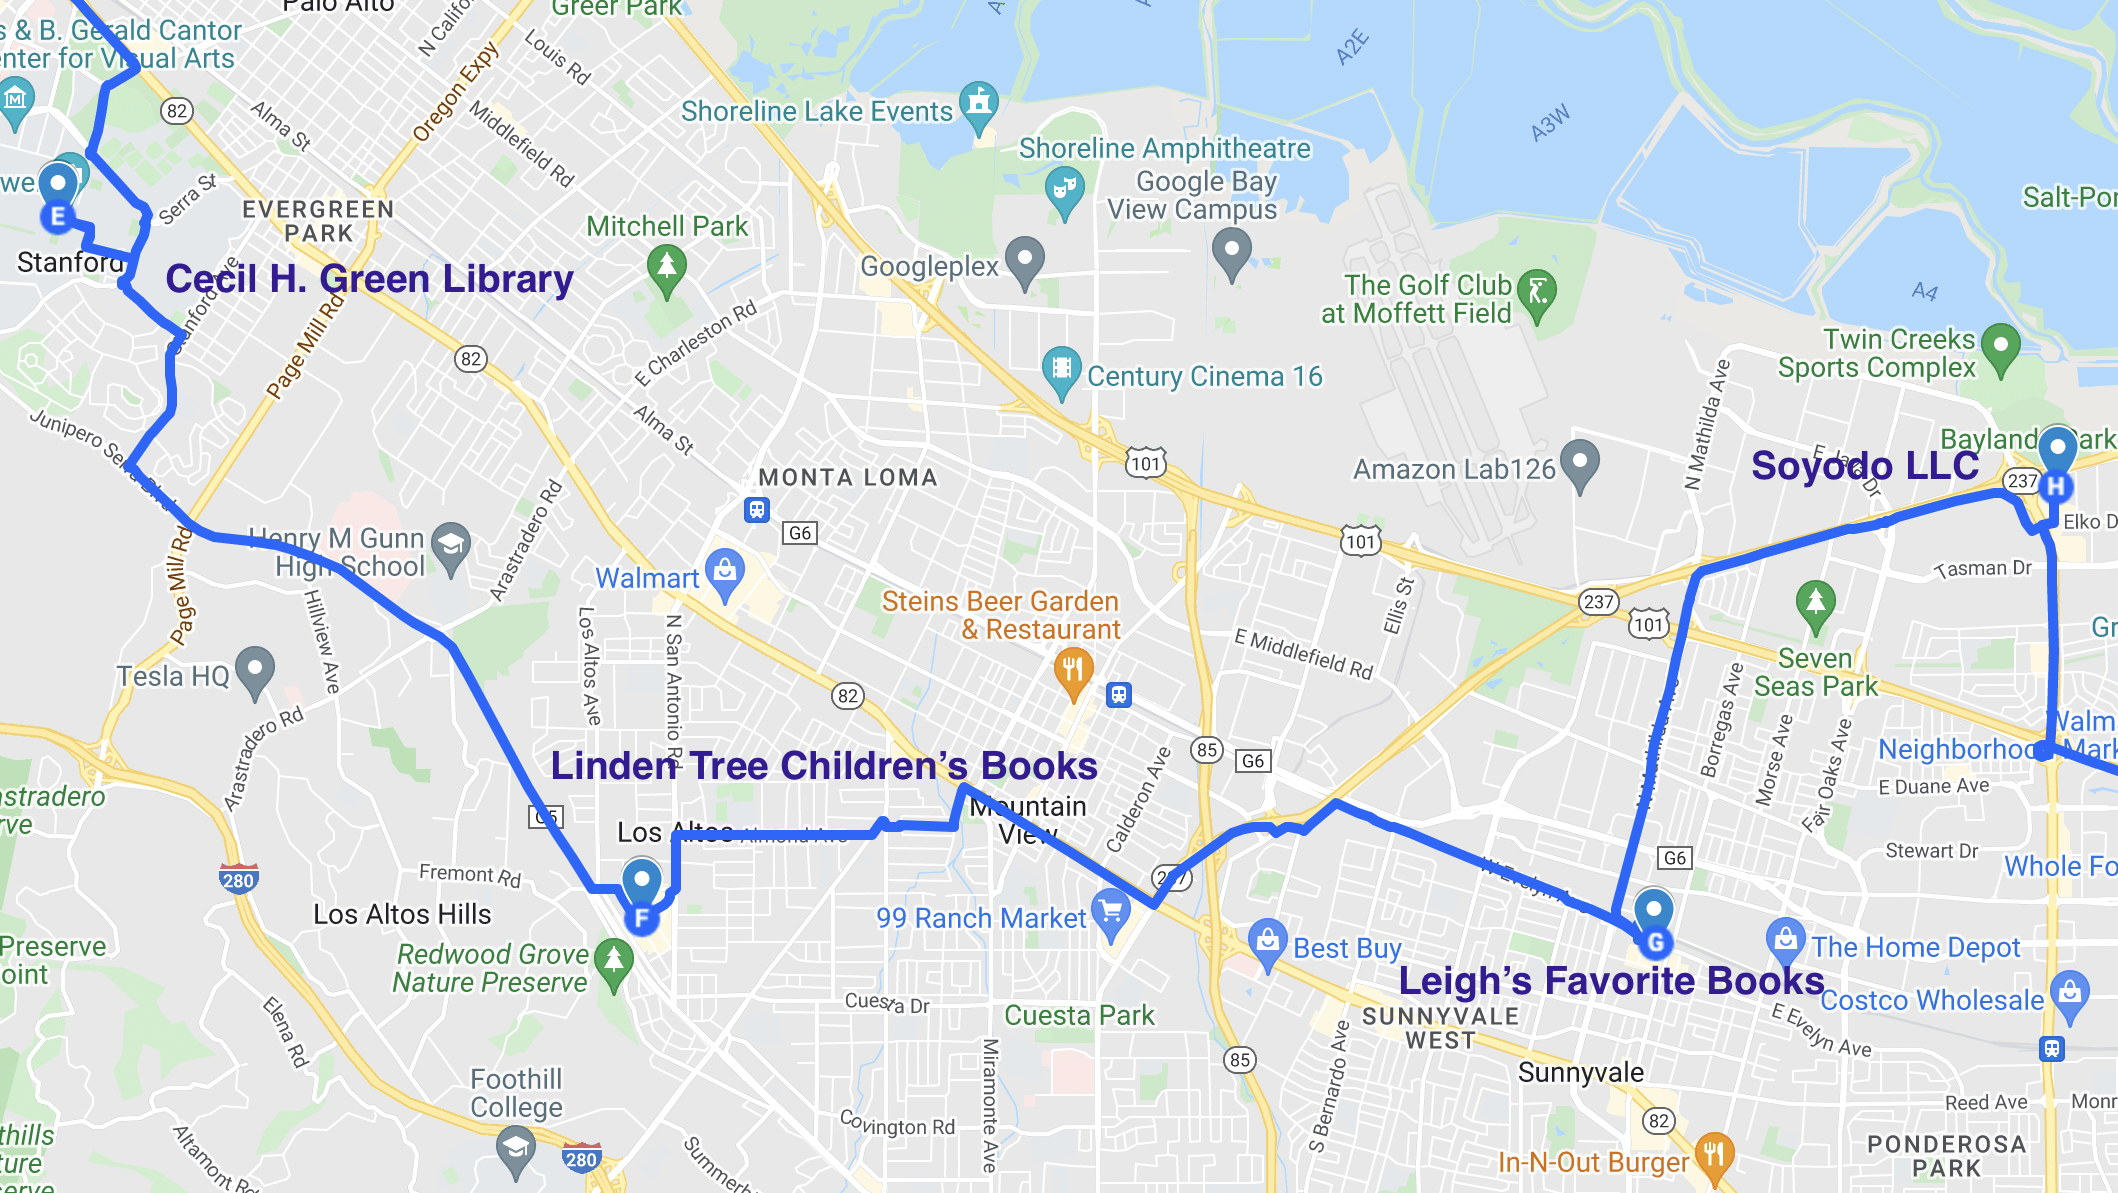 map of literary stops in stanford, los altos, and sunnyvale california